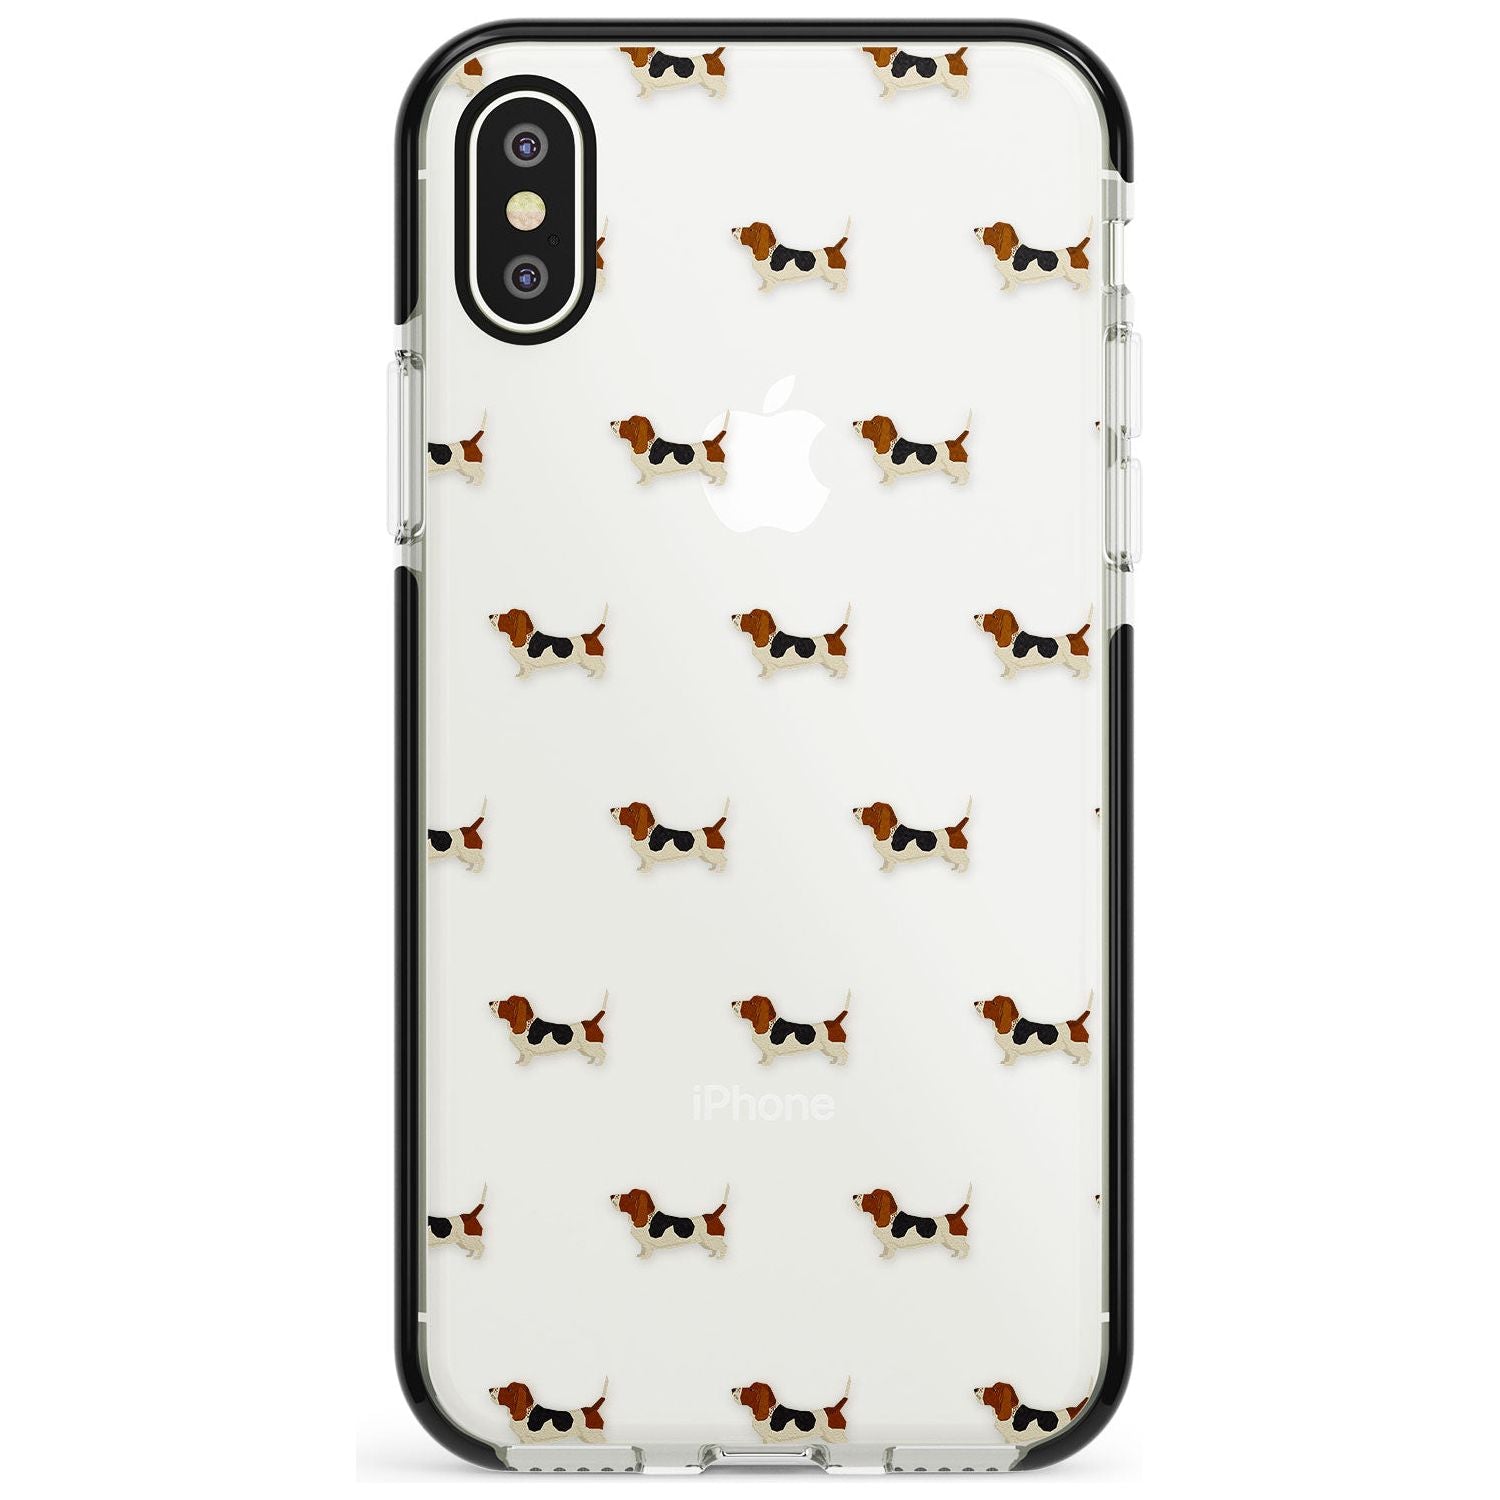 . Basset Hound Dog Pattern Clear Black Impact Phone Case for iPhone X XS Max XR